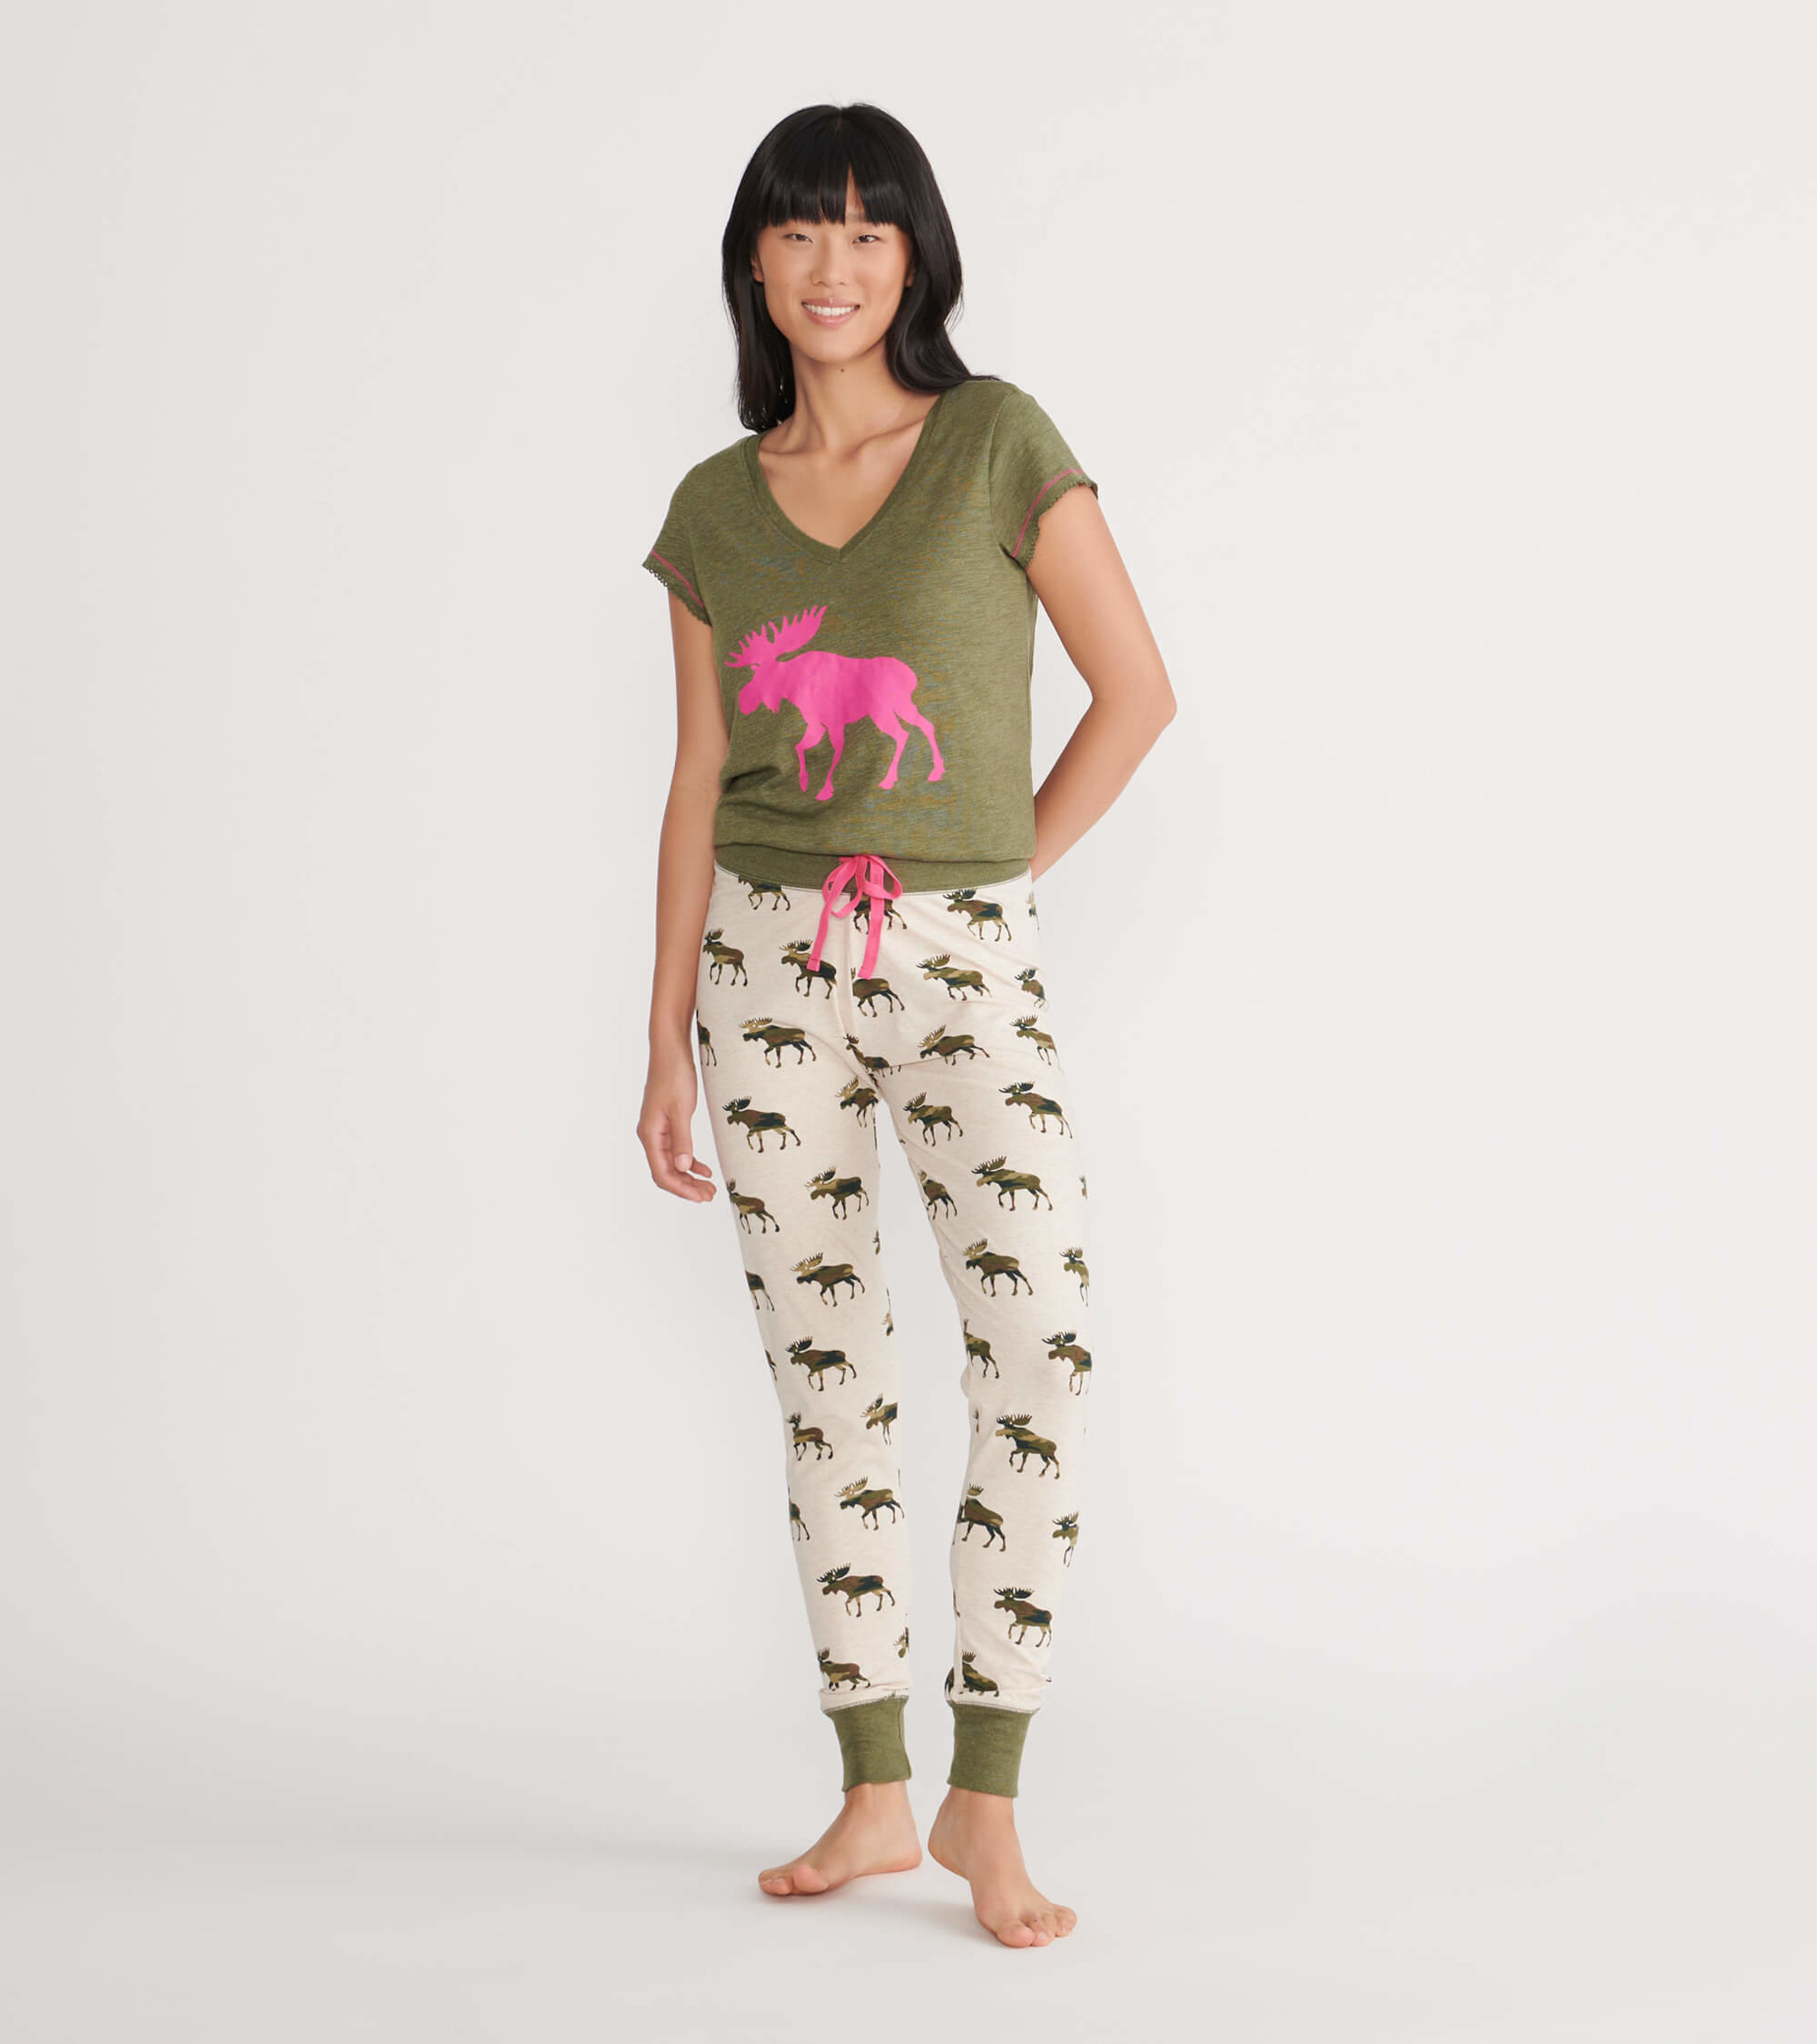 Patterned Moose Women's Tee and Pants Pajama Separates - Little